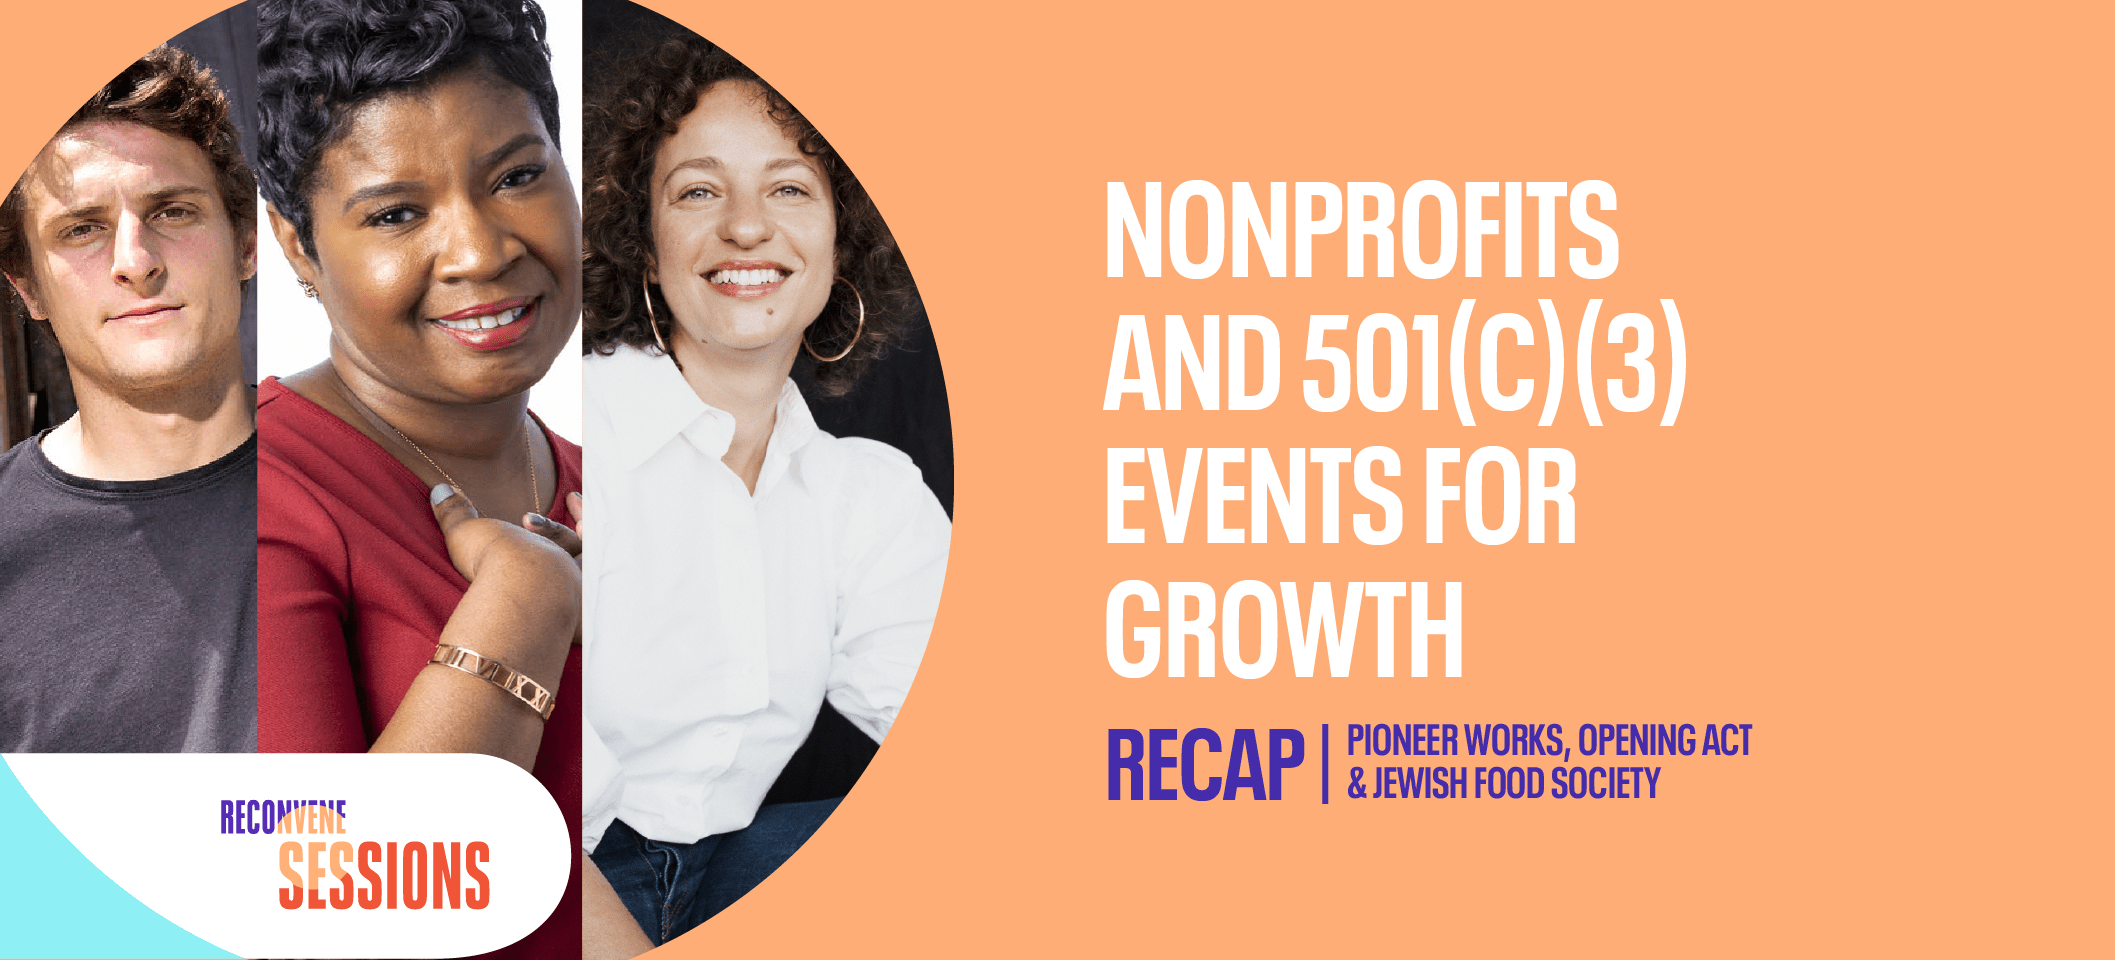 RECONVENE Sessions Nonprofits and 501(c)(3) Events for Growth Recap